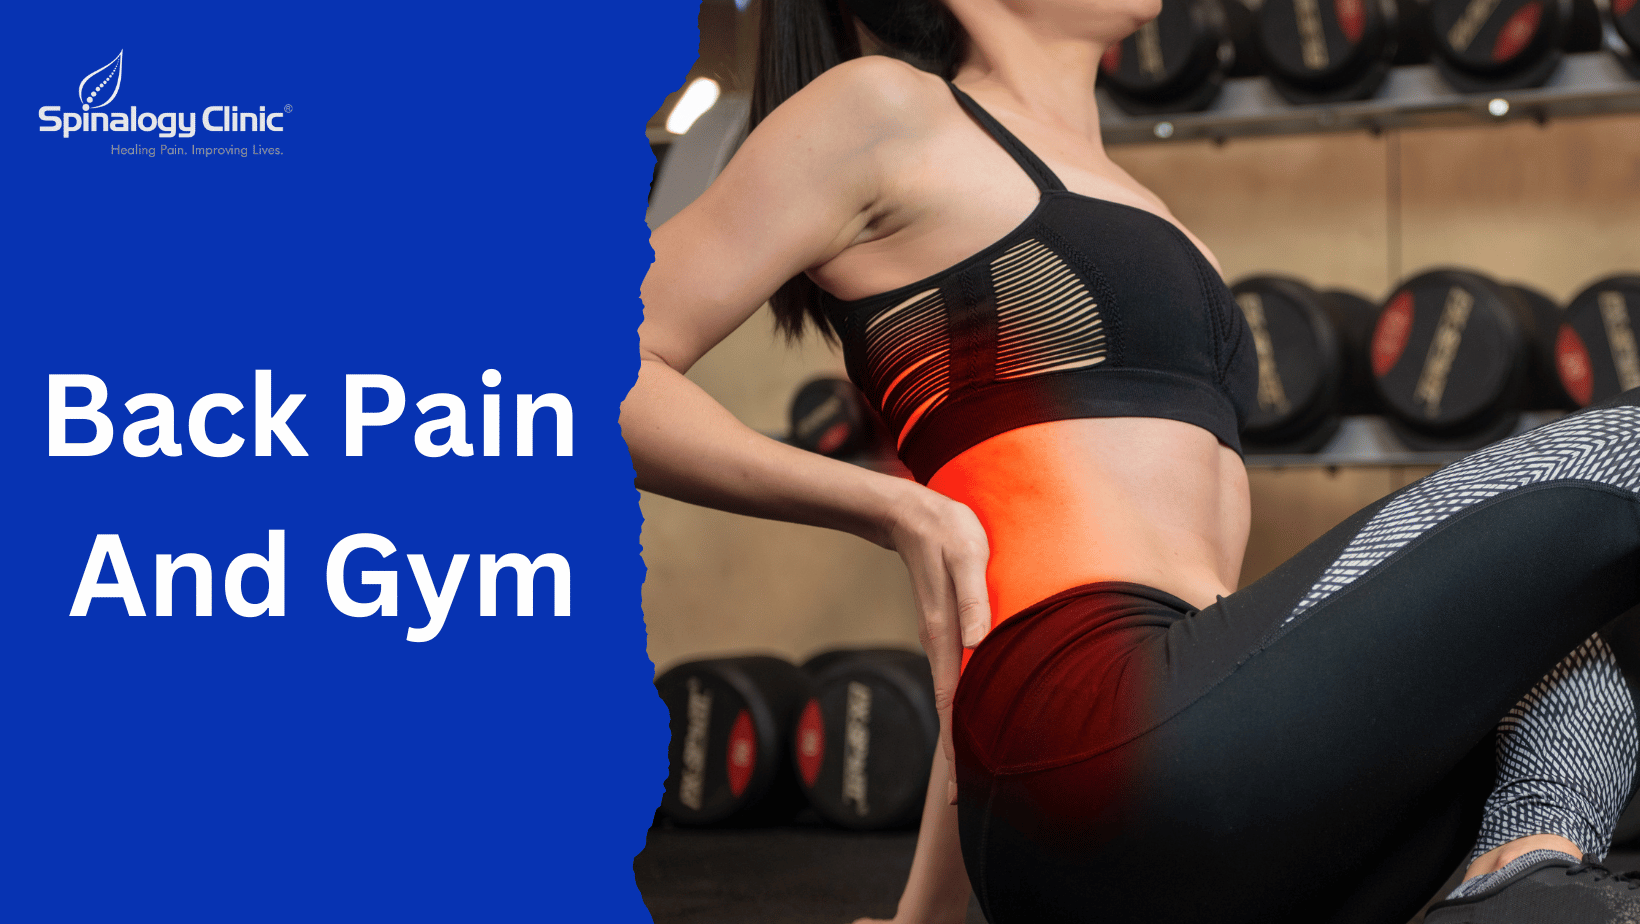 Back Pain And Gym